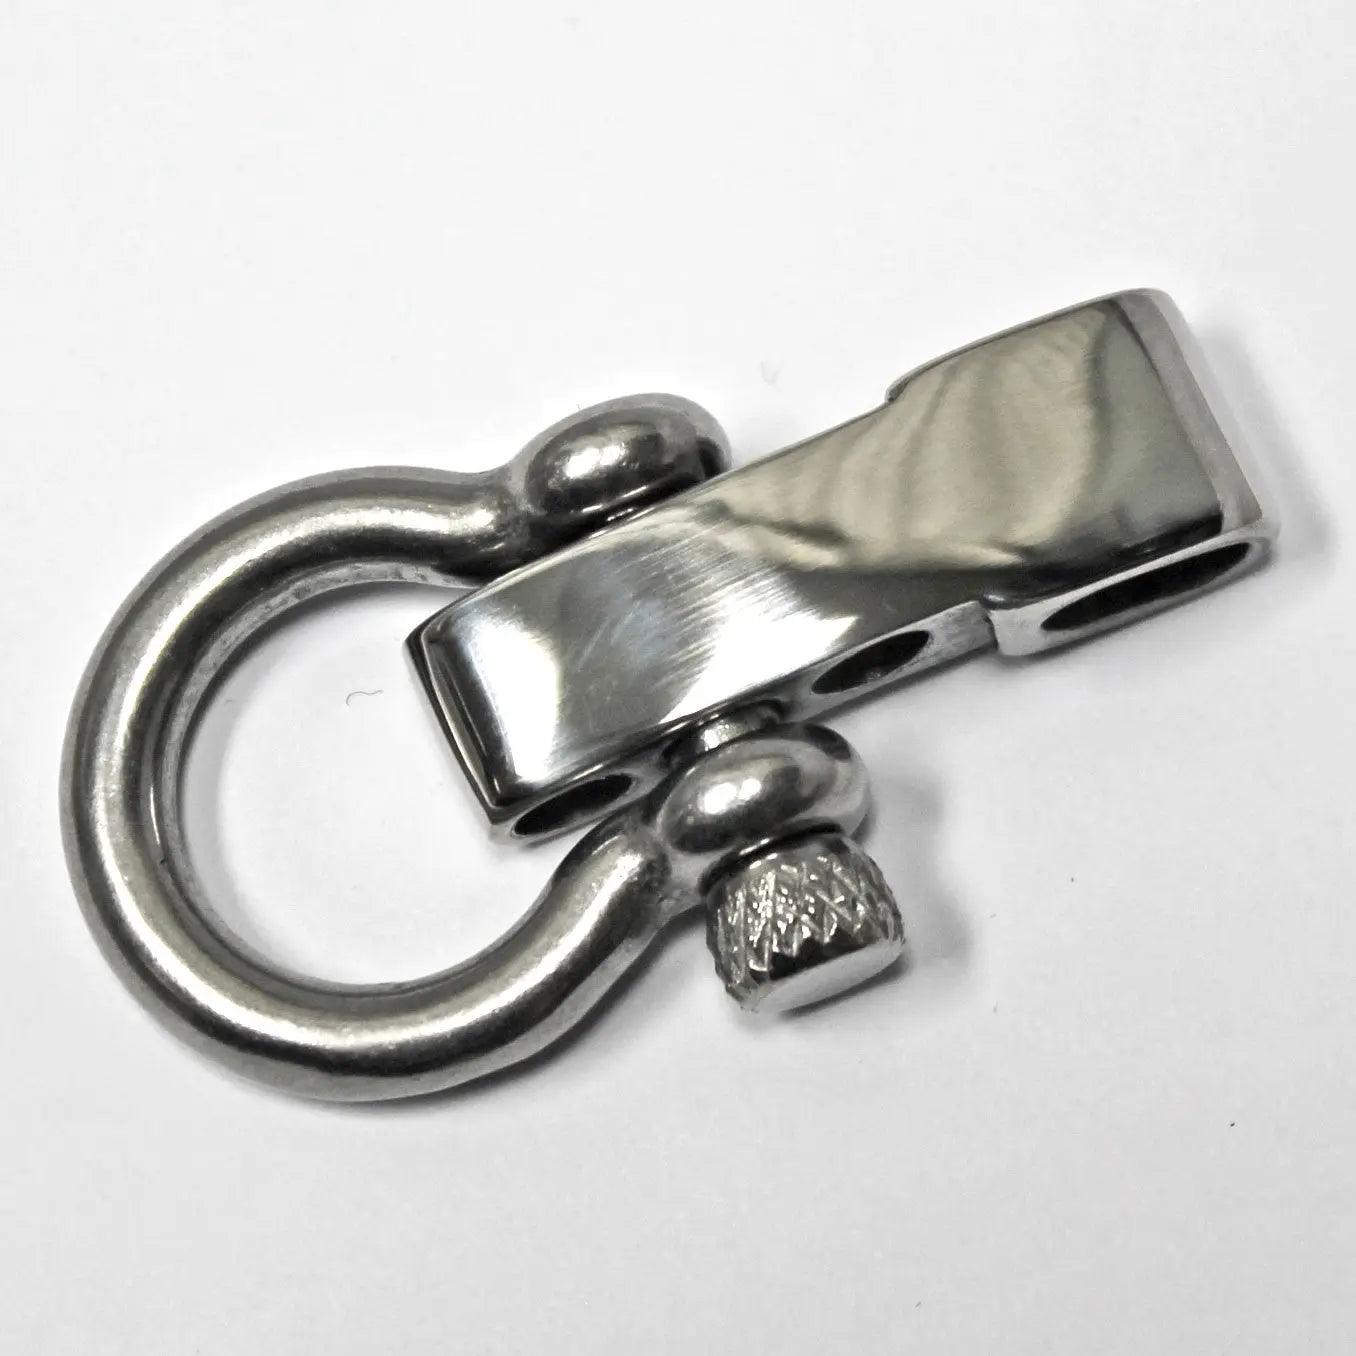 Adjustable Large Stainless Steel Bow Shackle (1 Pack) - Paracord Galaxy